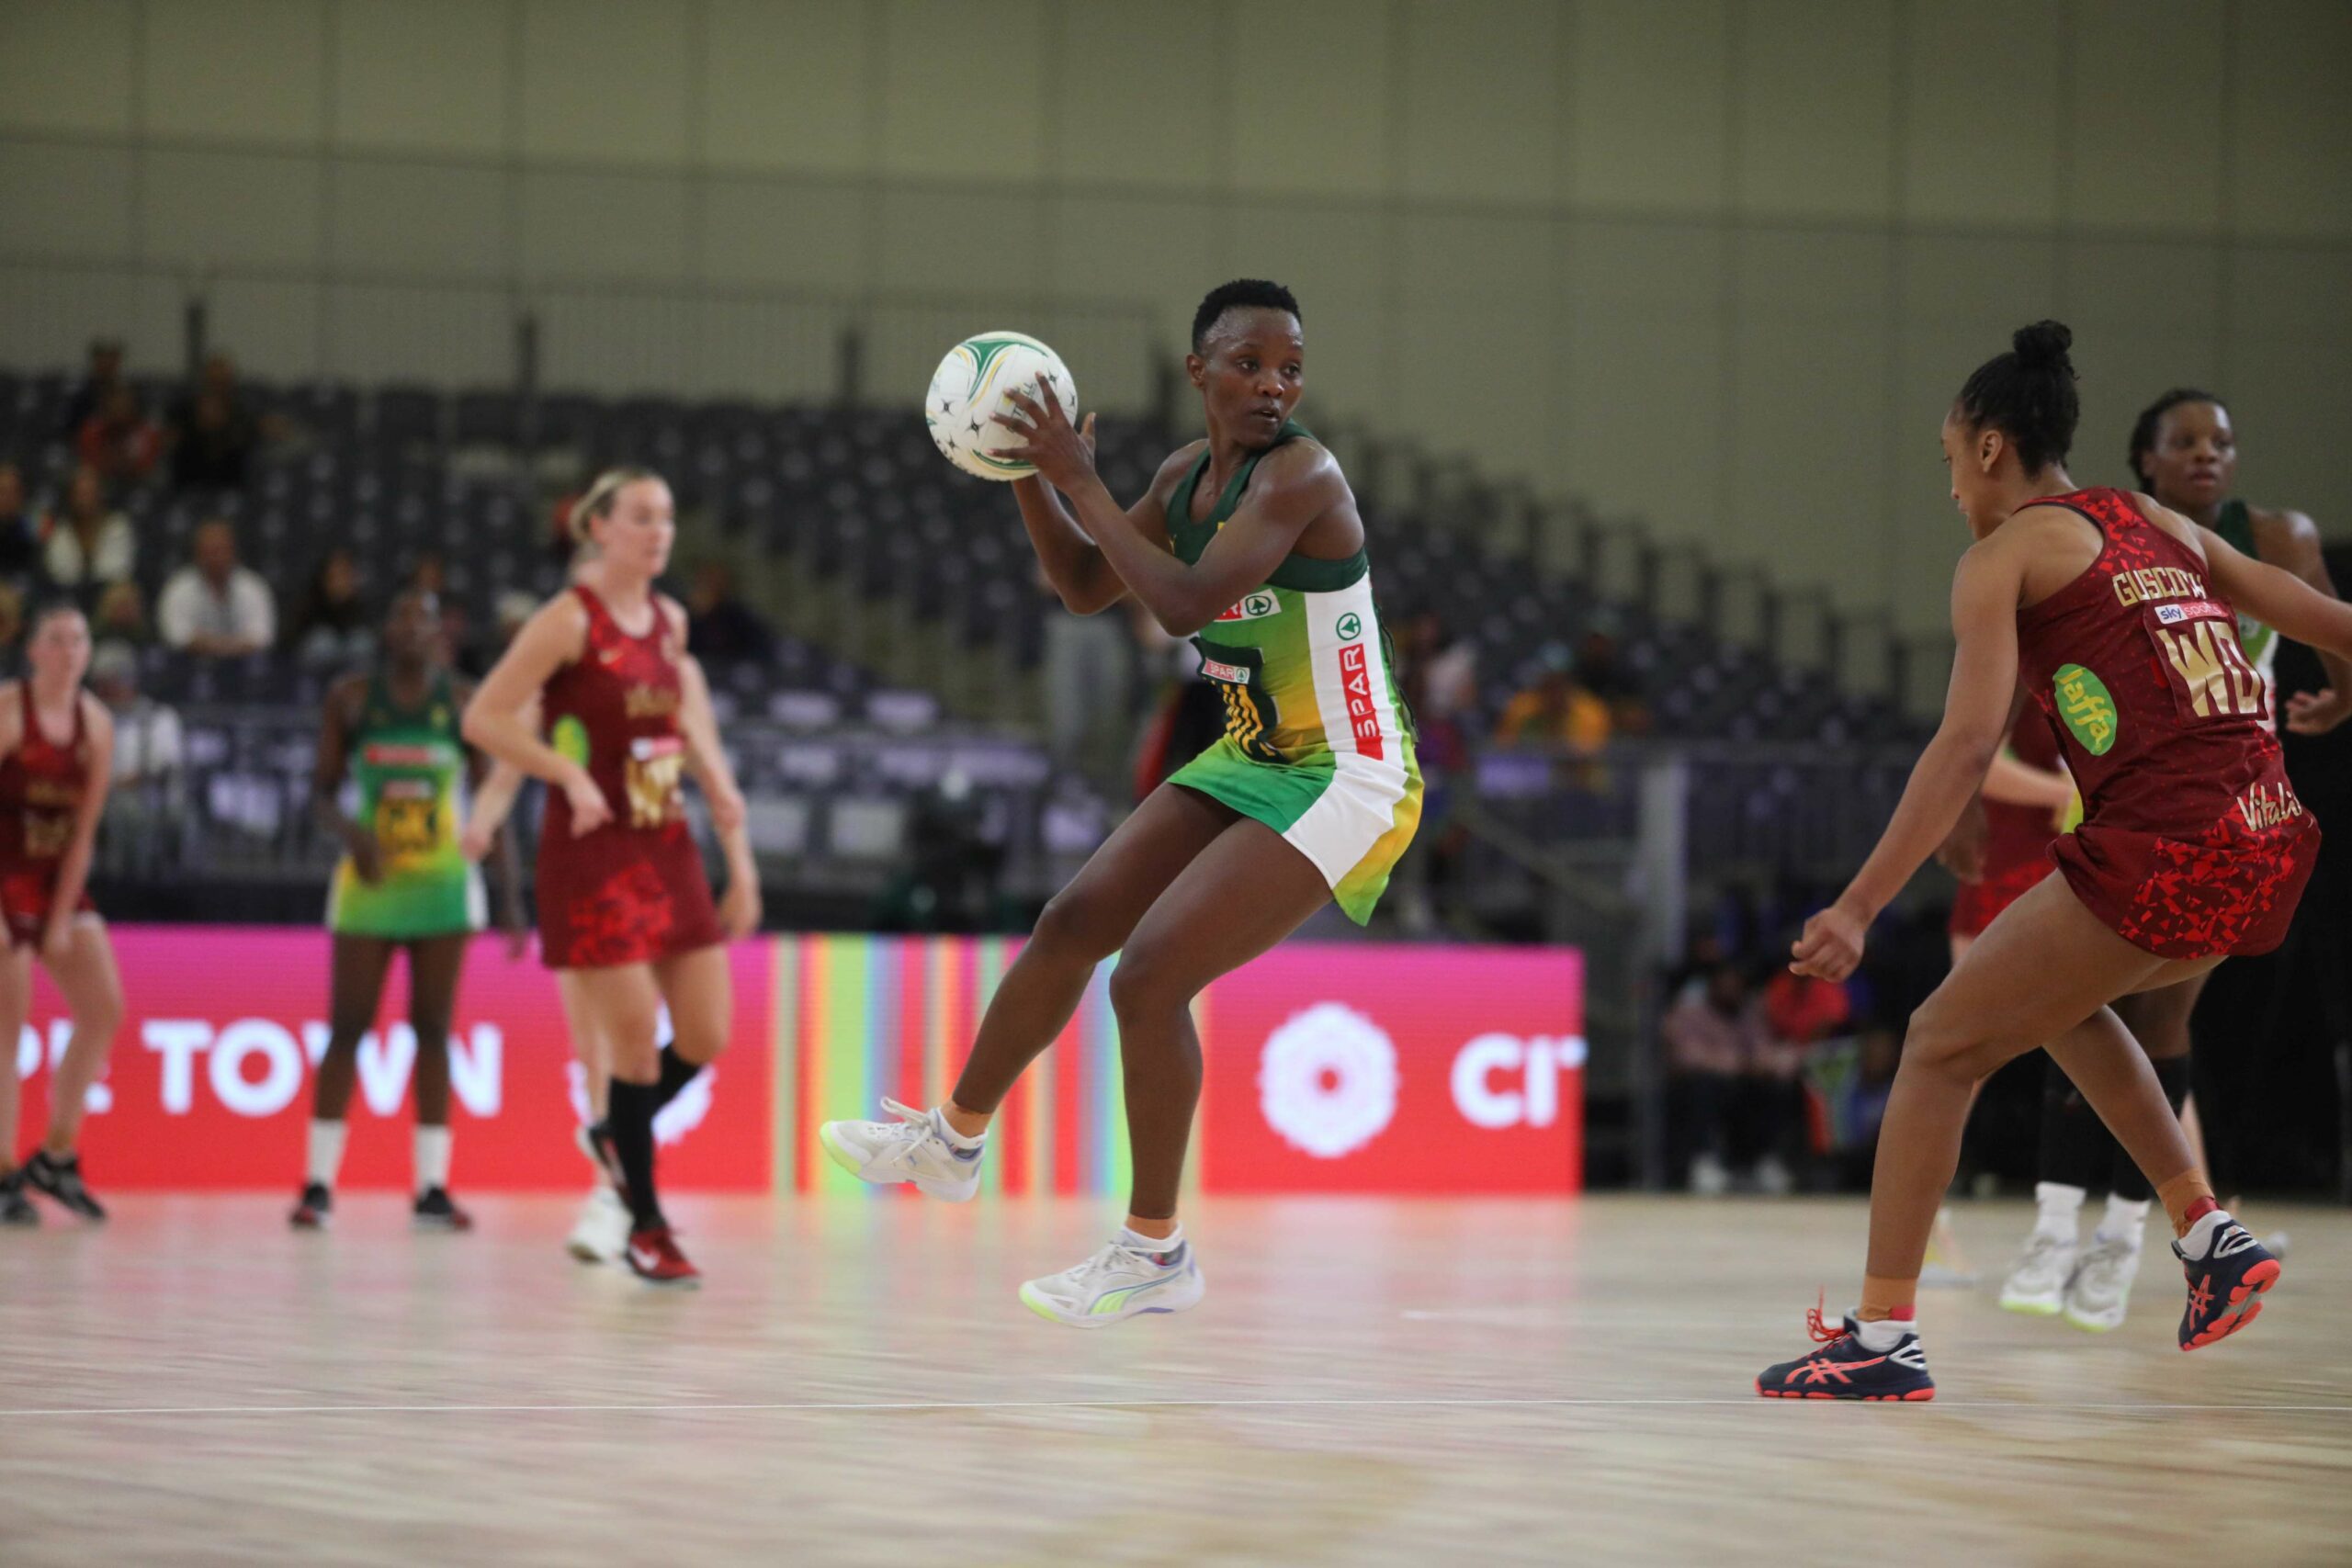 DStv Is Here for Her: The 2023 Netball World Cup is coming to your home